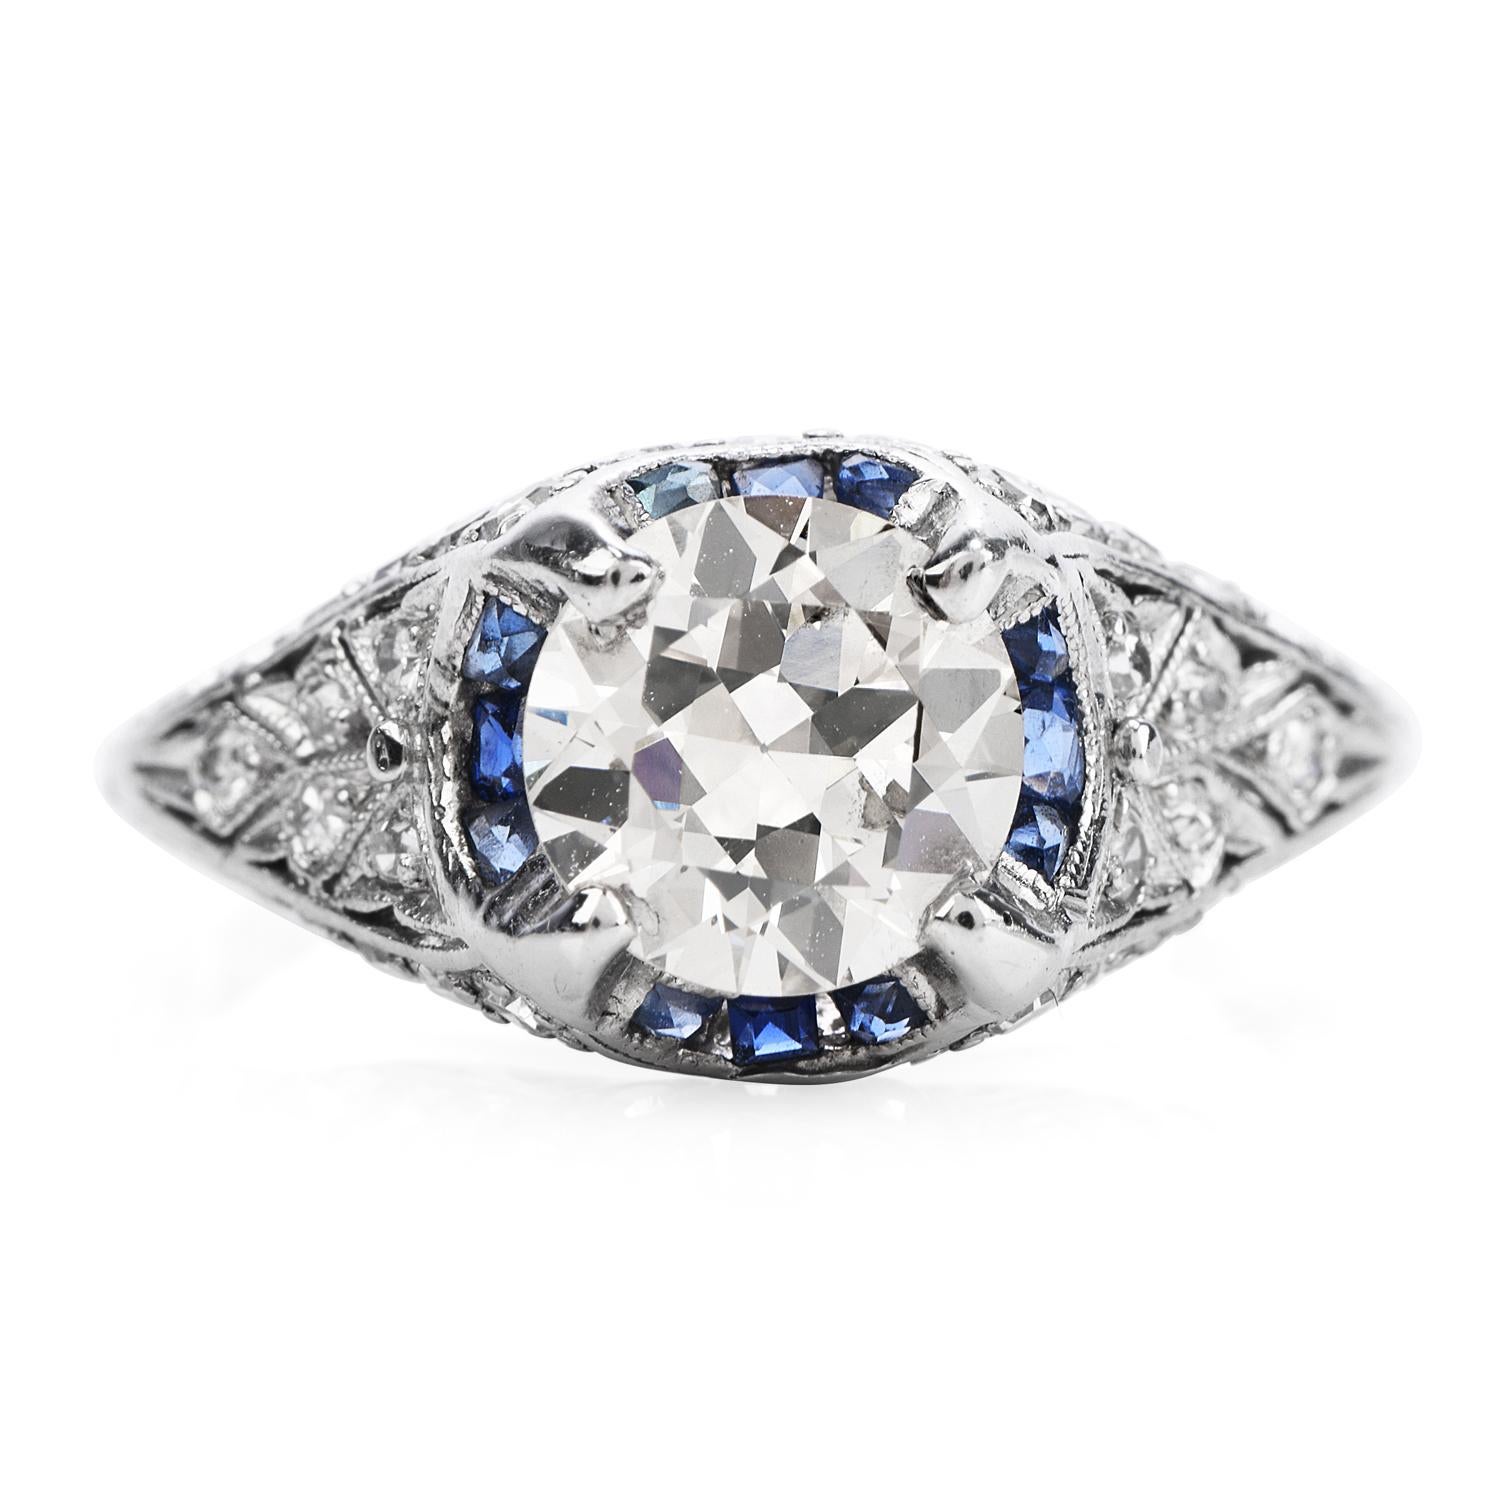 Vintage Diamond & Blue Sapphire engagement ring with engraved accents sides,

Crafted in solid platinum,

The center diamond is a round European-cut, a prong-set genuine diamond weighing in total 1.50 carats, (I-J color and SI1 Clarity),

The sides